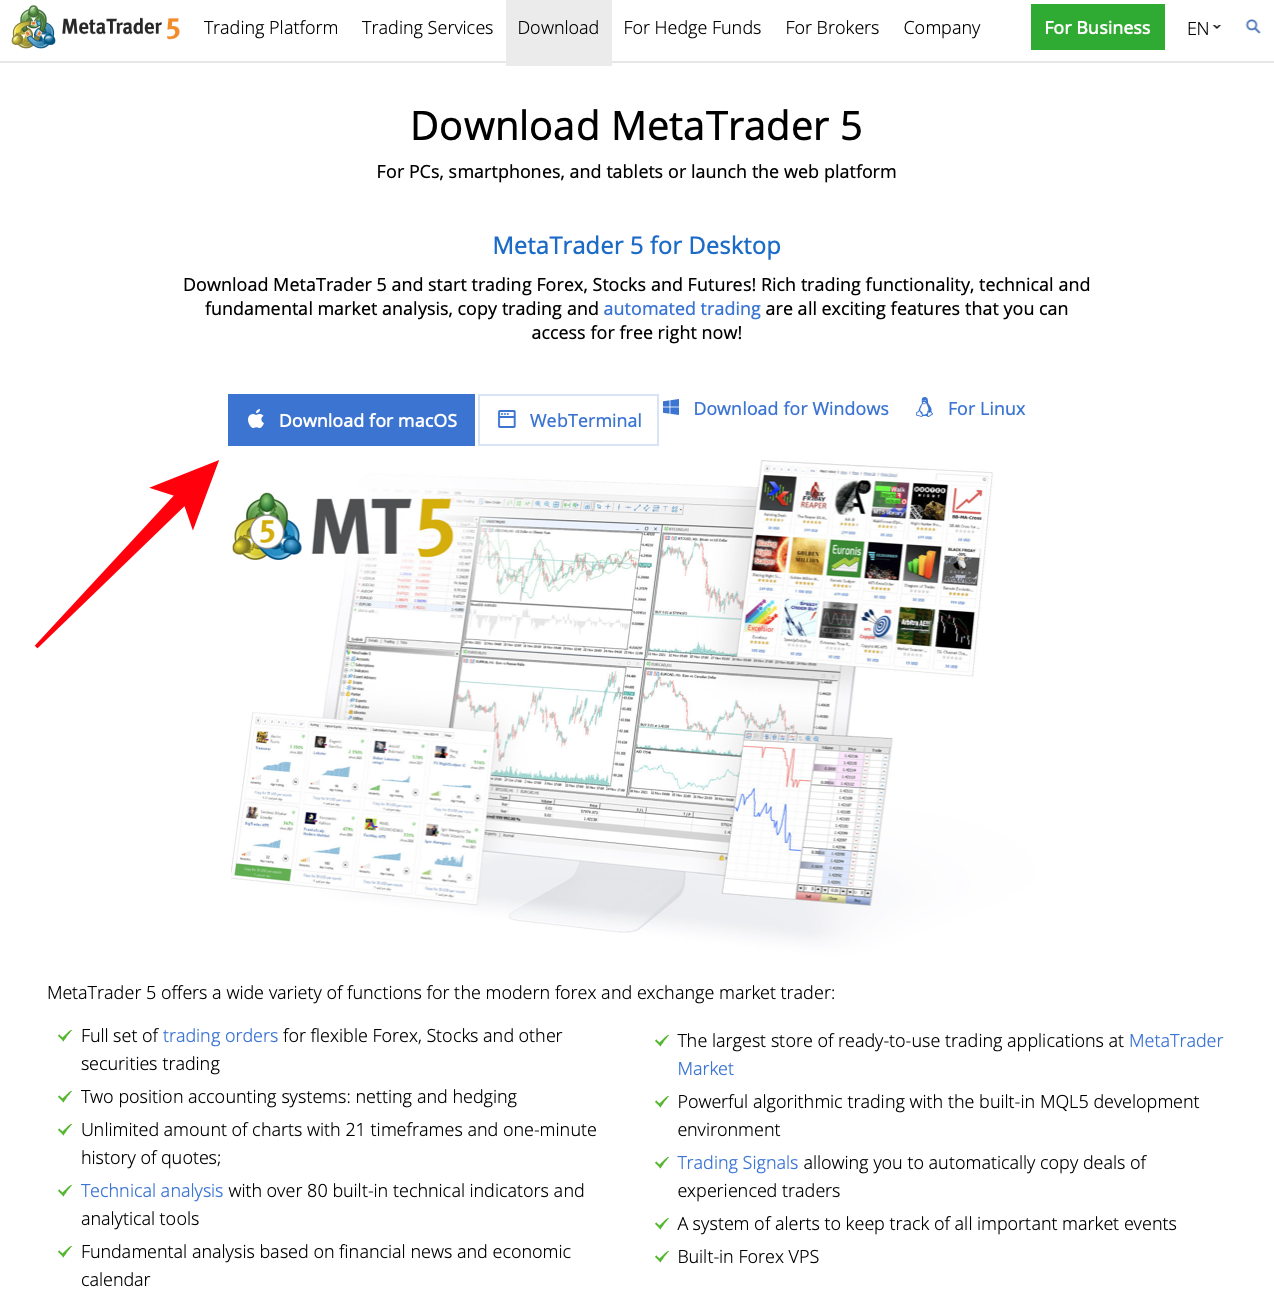 How to install and download the MetaTrader 5 trading software